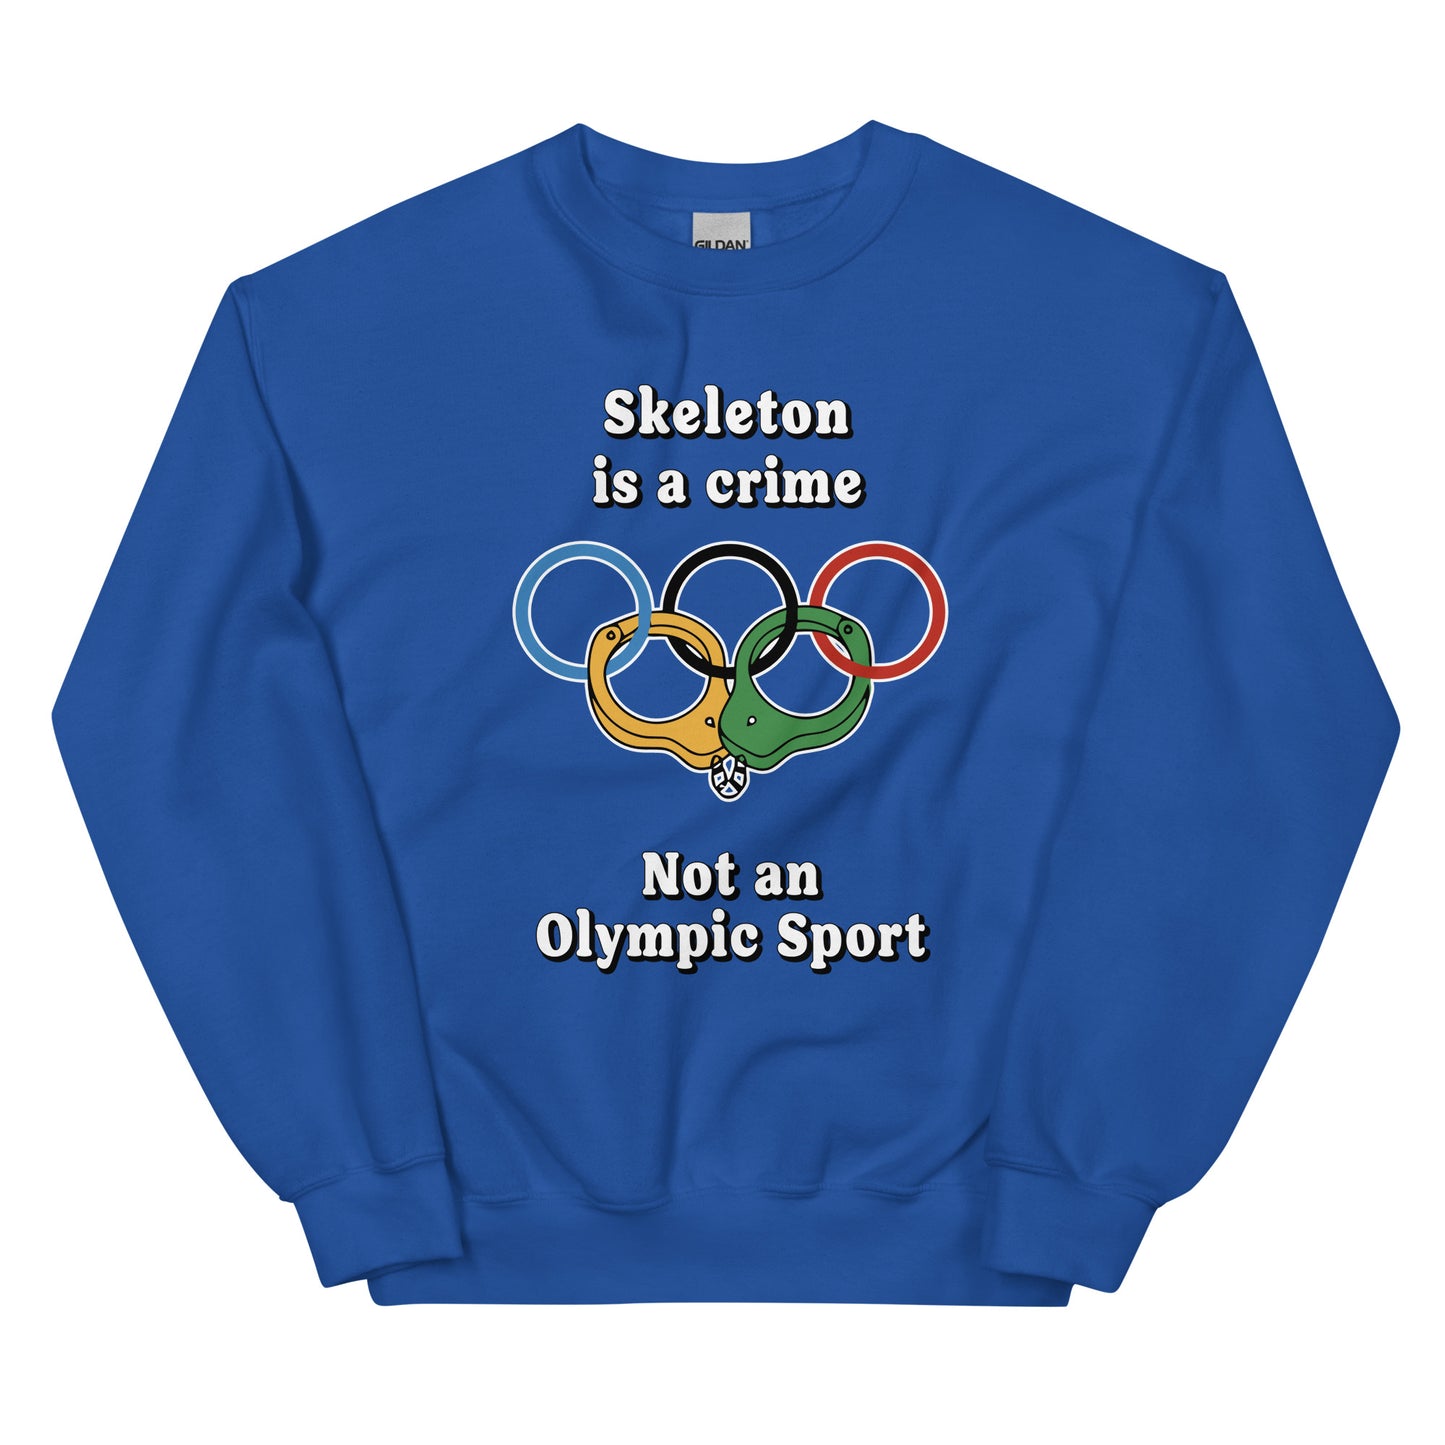 Skeleton is a crime not an olympic sport design printed on a crewneck sweatshirt by Whistler Shirts